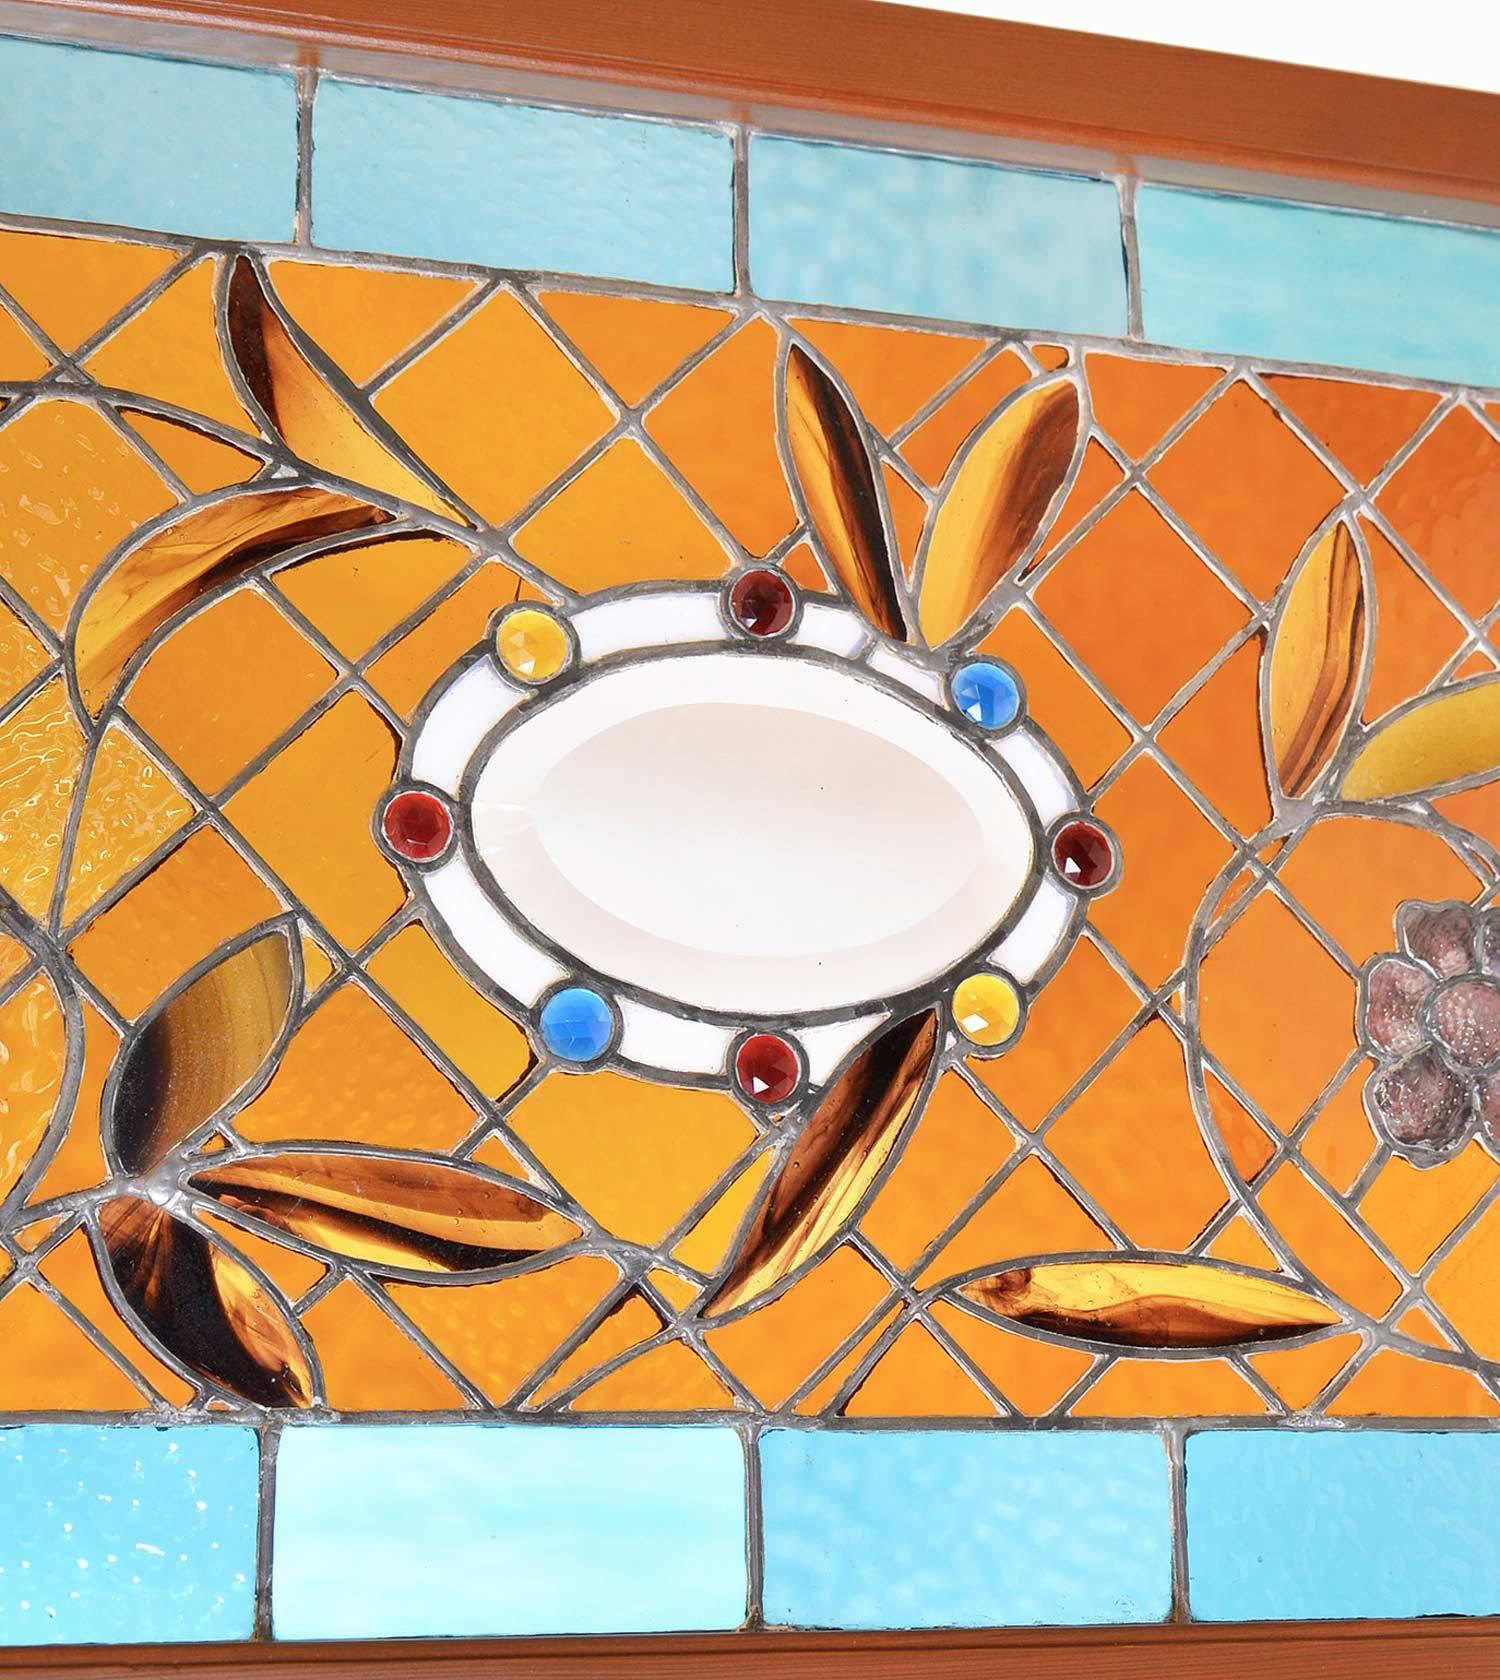 This Victorian stained glass window is a wonderful example of a stained glass artist's experimentation with color, design and texture. A beveled oval center surrounded by eight faceted round red, yellow and blue jewels create the focal point while